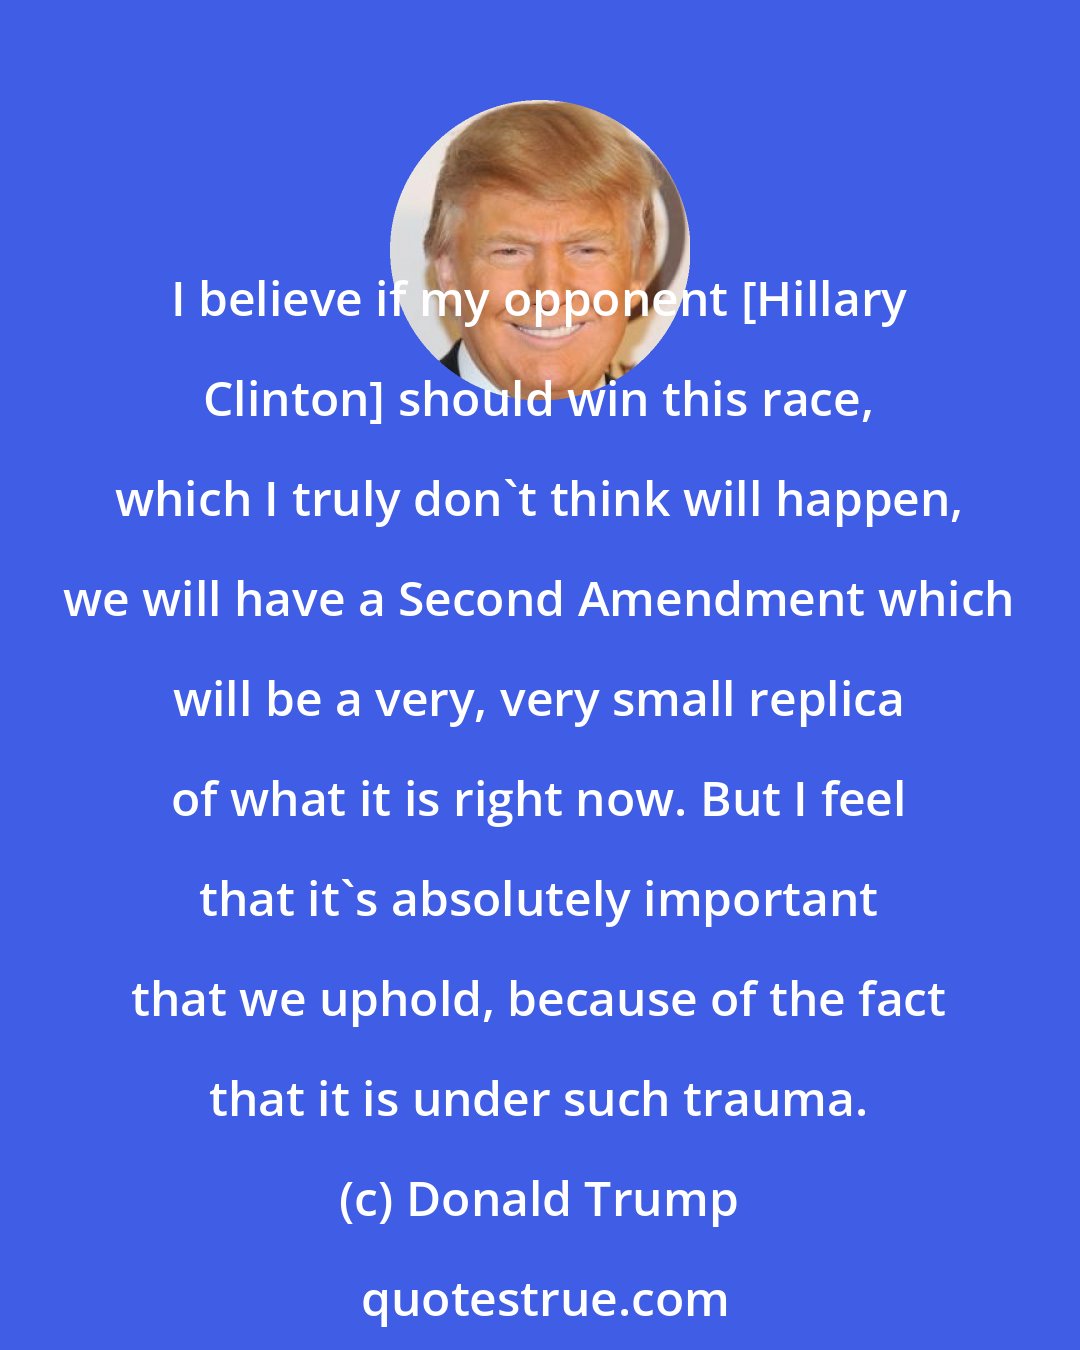 Donald Trump: I believe if my opponent [Hillary Clinton] should win this race, which I truly don't think will happen, we will have a Second Amendment which will be a very, very small replica of what it is right now. But I feel that it's absolutely important that we uphold, because of the fact that it is under such trauma.